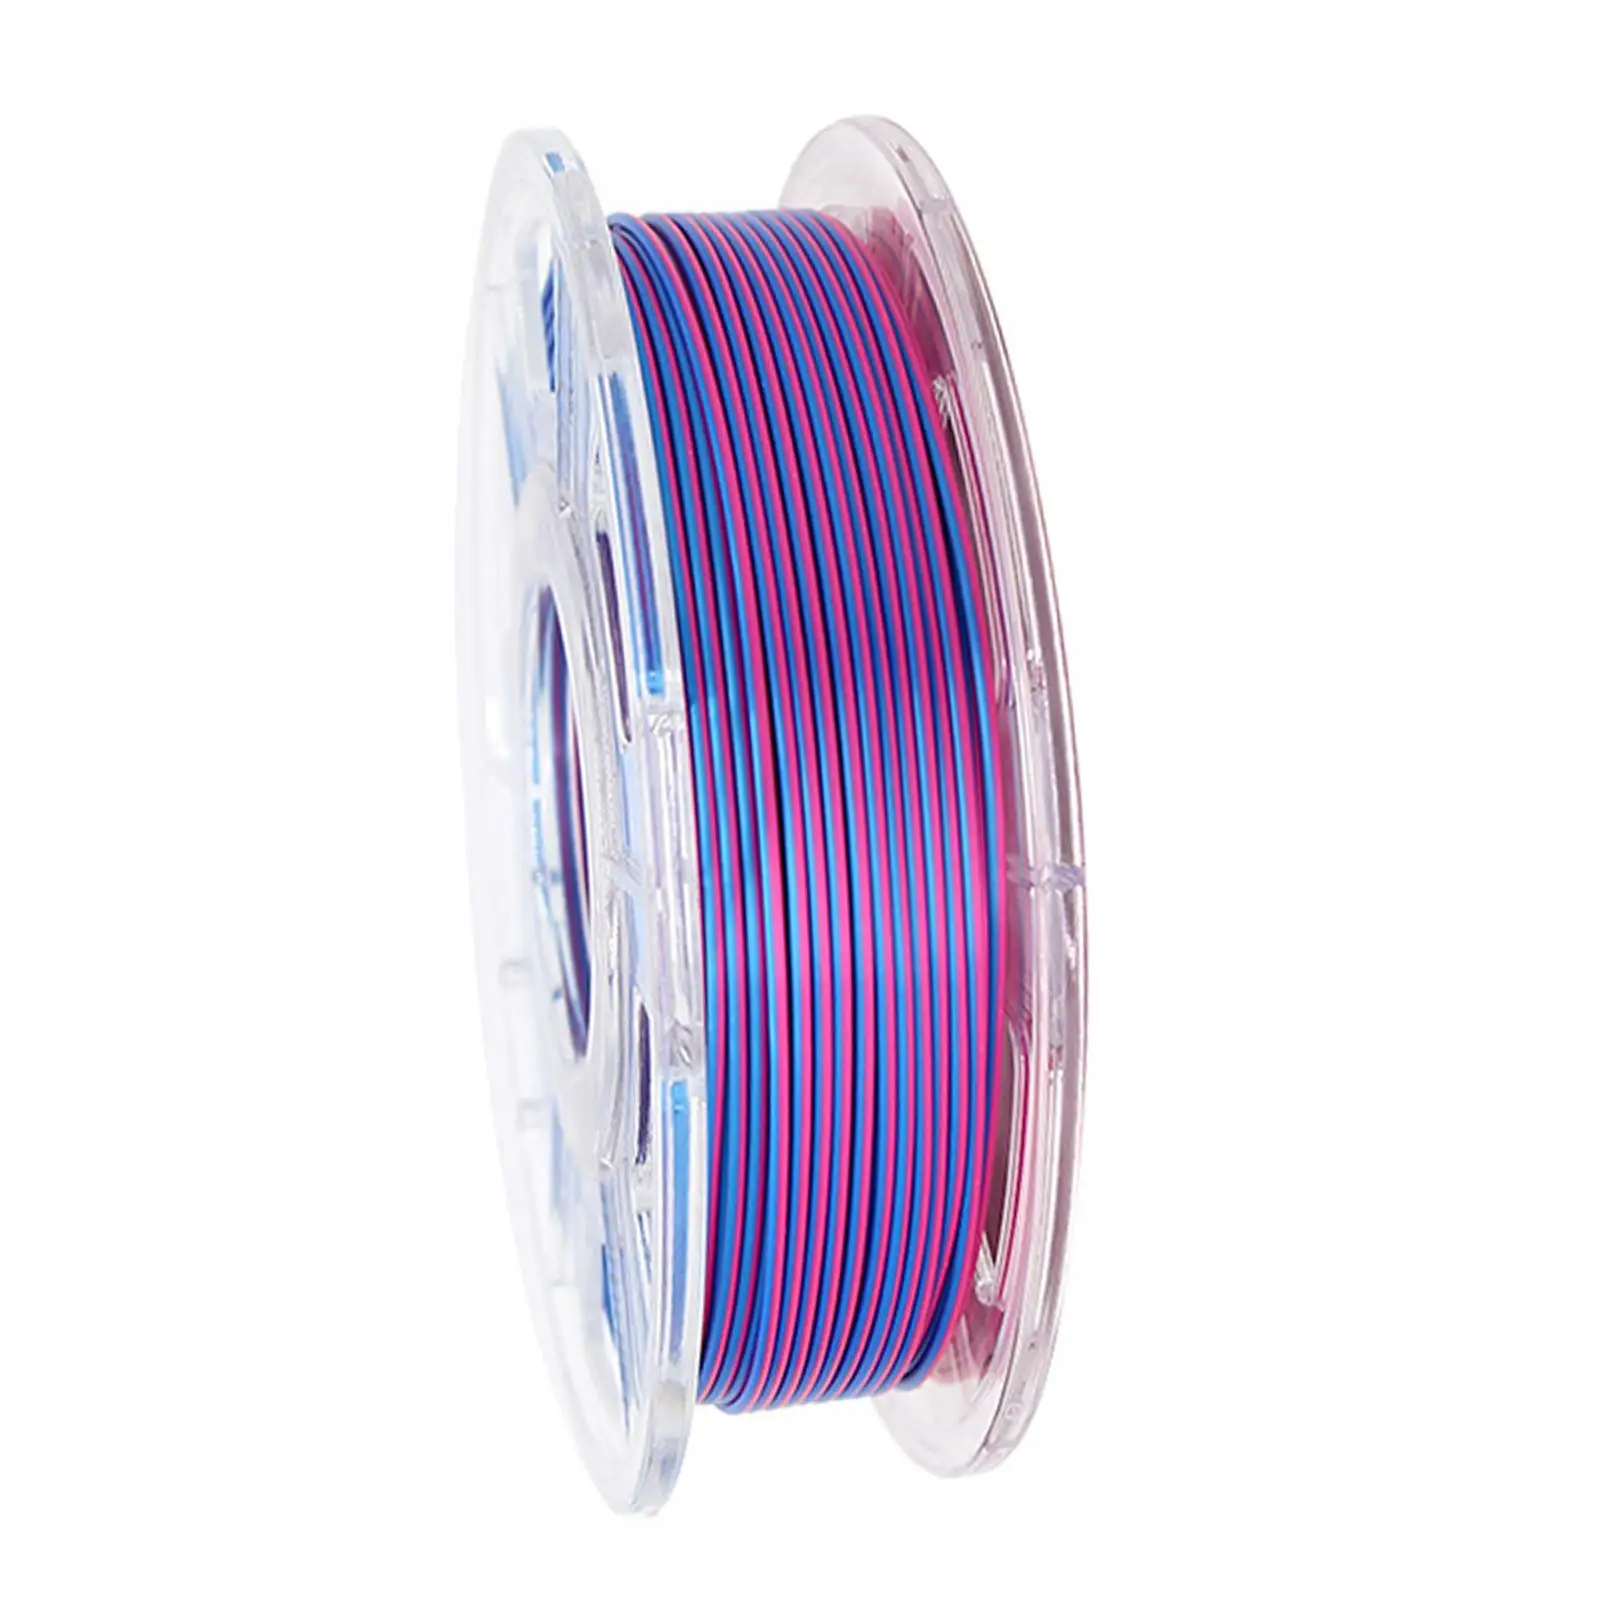 3D Double Colors Silk PLA Coextrusion Filament, 1.75mm 2 Colors Printing Silk PLA, Widely Fit for 3D Printer